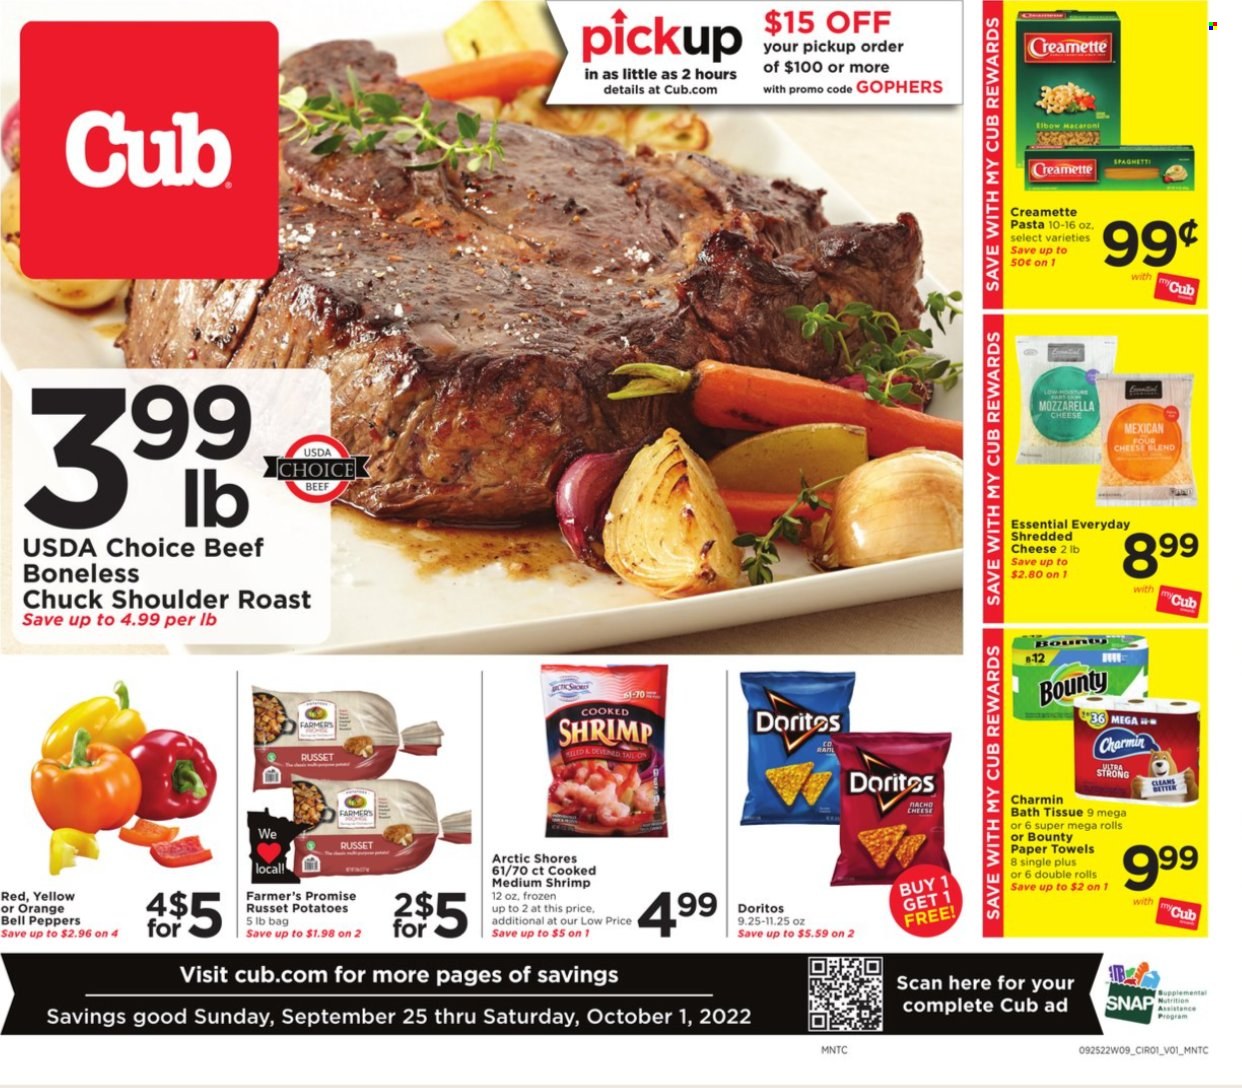 thumbnail - Cub Foods Flyer - 09/25/2022 - 10/01/2022 - Sales products - bell peppers, russet potatoes, potatoes, peppers, oranges, shrimps, Arctic Shores, spaghetti, macaroni, pasta, mozzarella, shredded cheese, Bounty, Doritos, Creamette, bath tissue, kitchen towels, paper towels, Charmin. Page 1.